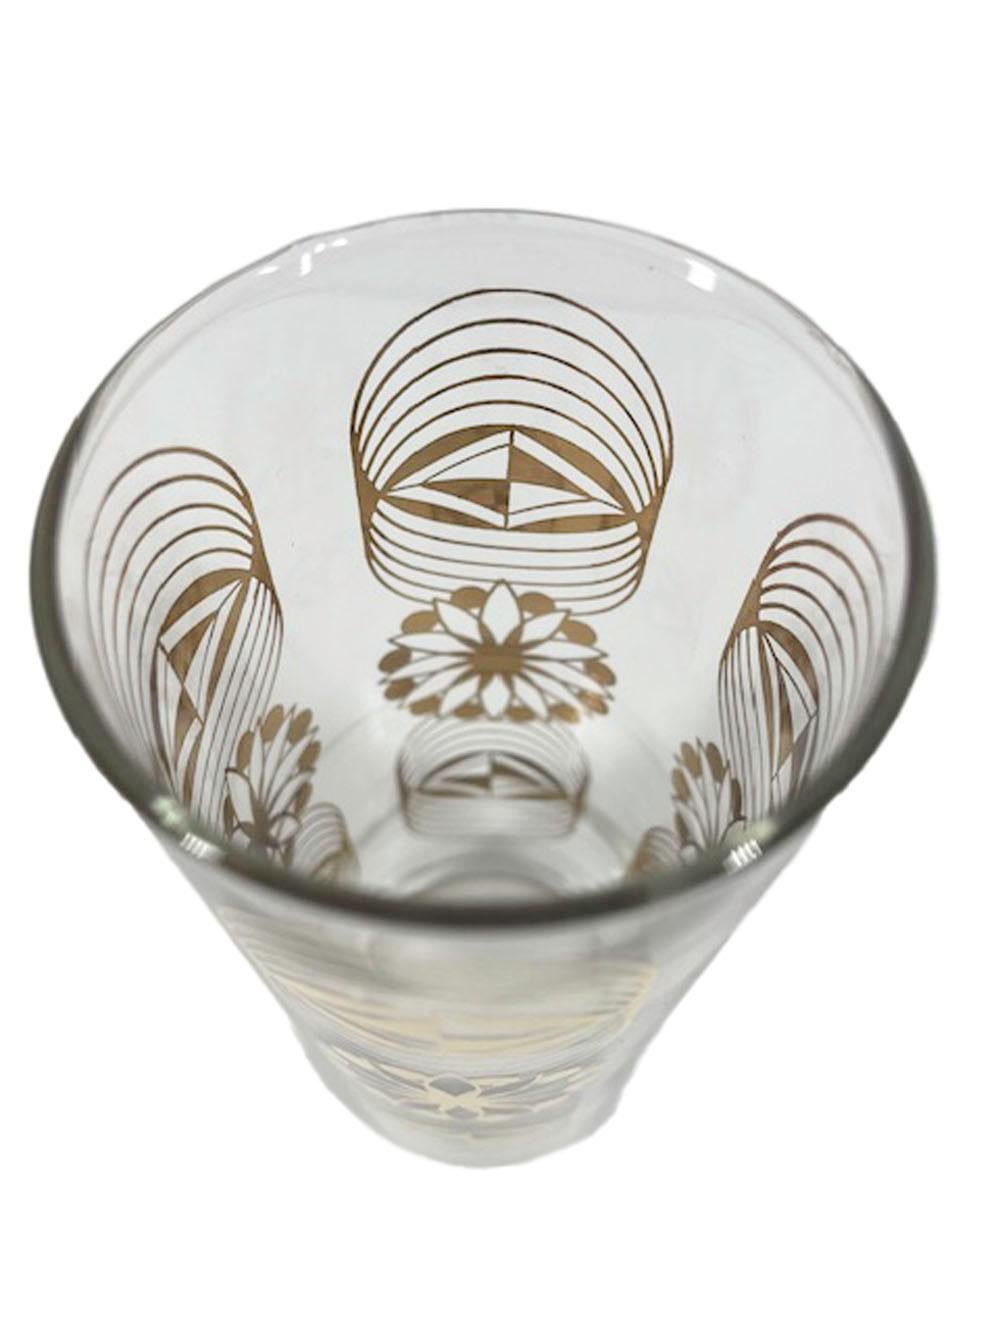 Six Vintage Ravenhead Highball Glasses with 22k Gold Geometric Designs In Good Condition For Sale In Nantucket, MA